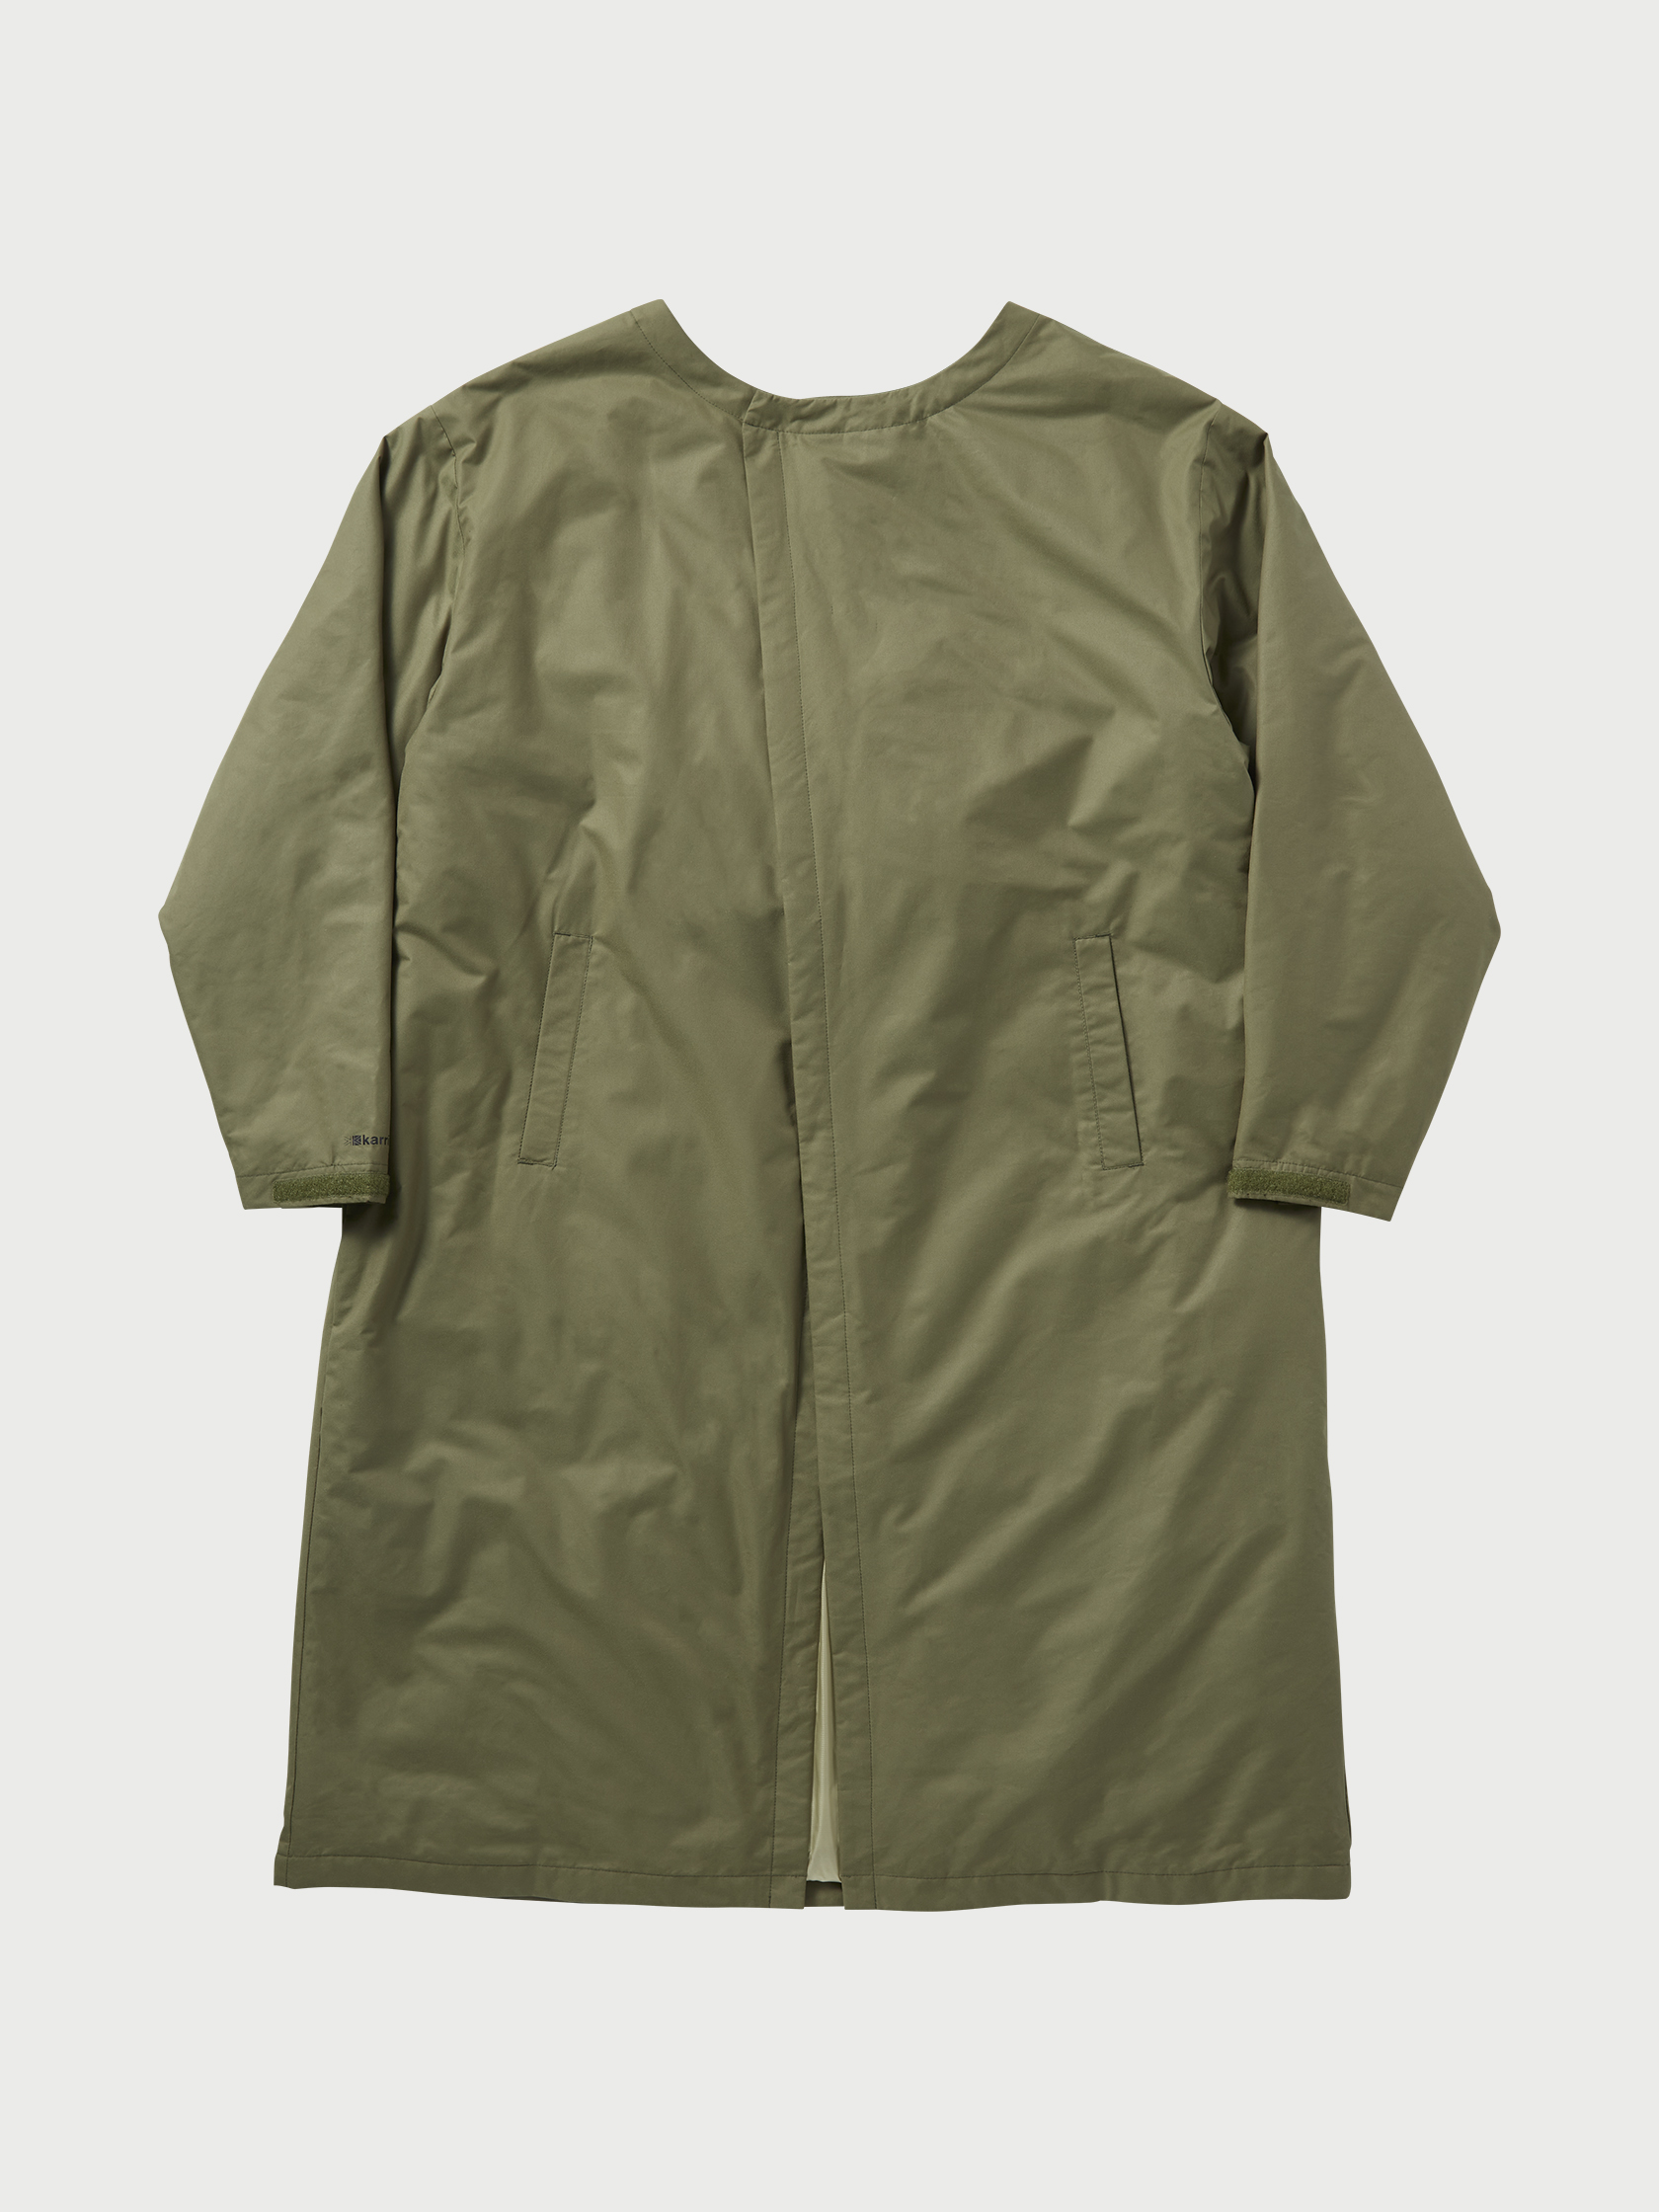 thermal camp 2 way jkt | karrimor カリマー | リュックサック ...